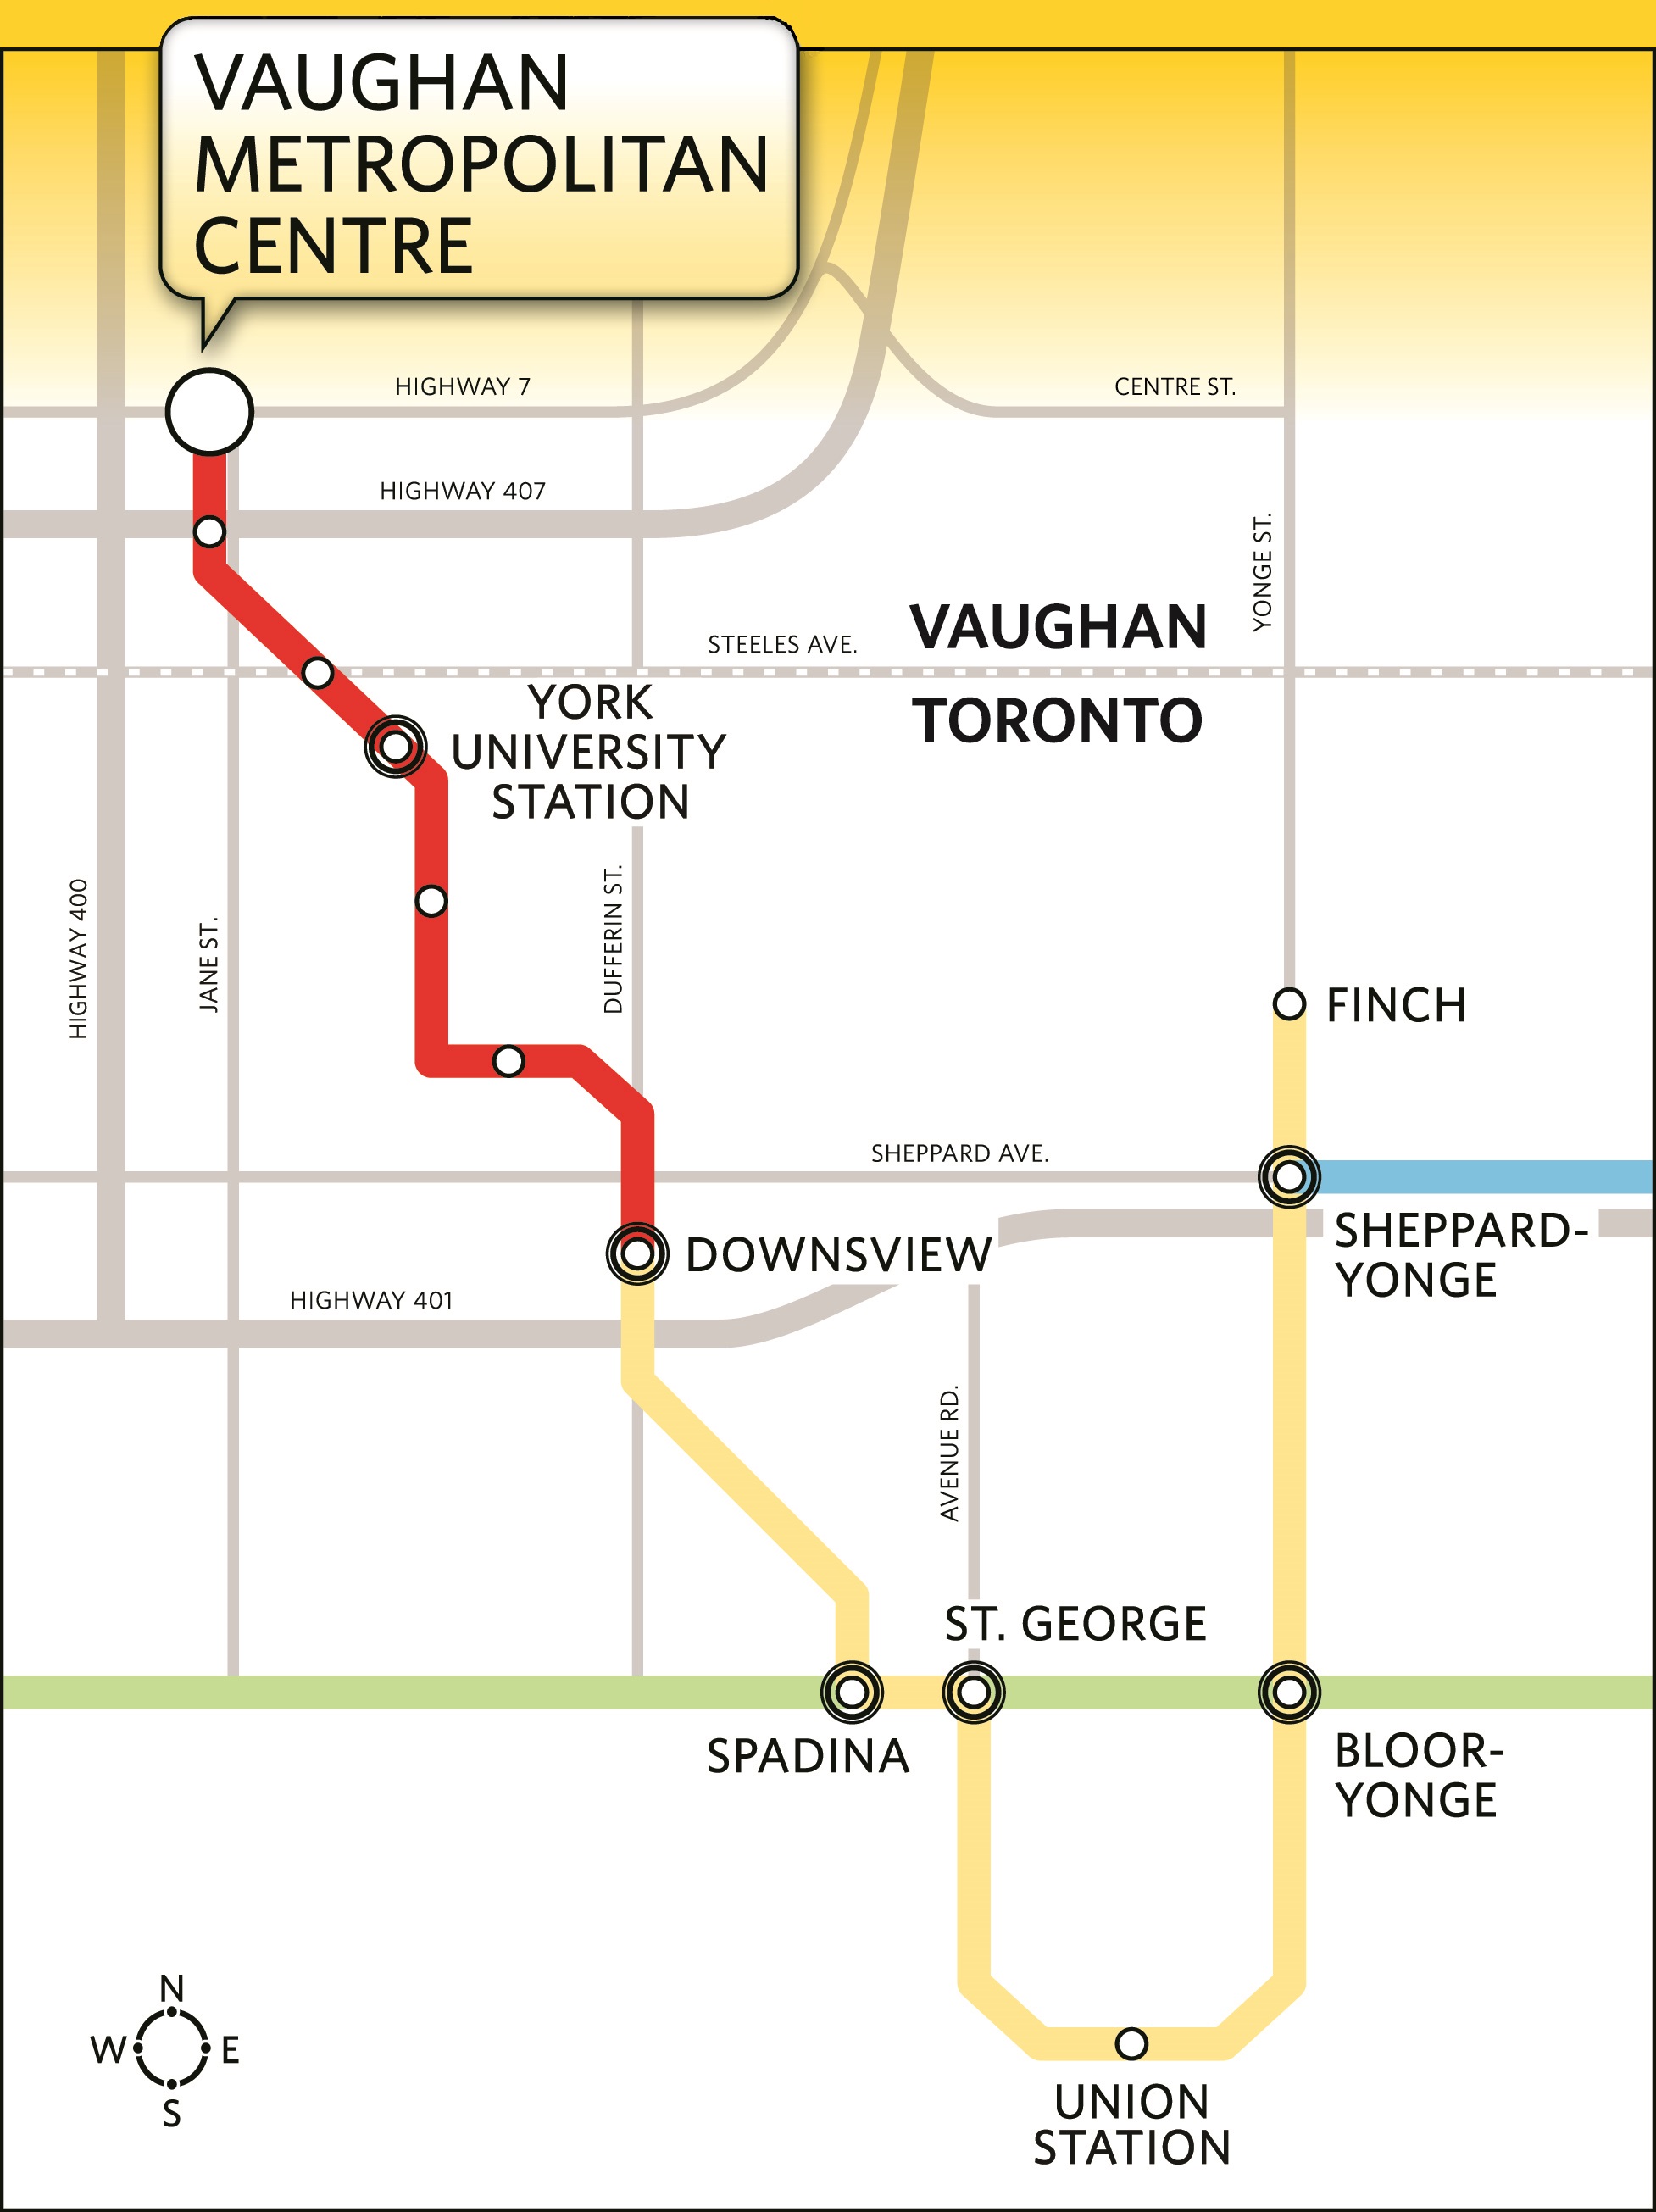 2017 Subway Map showing Vaughan extension